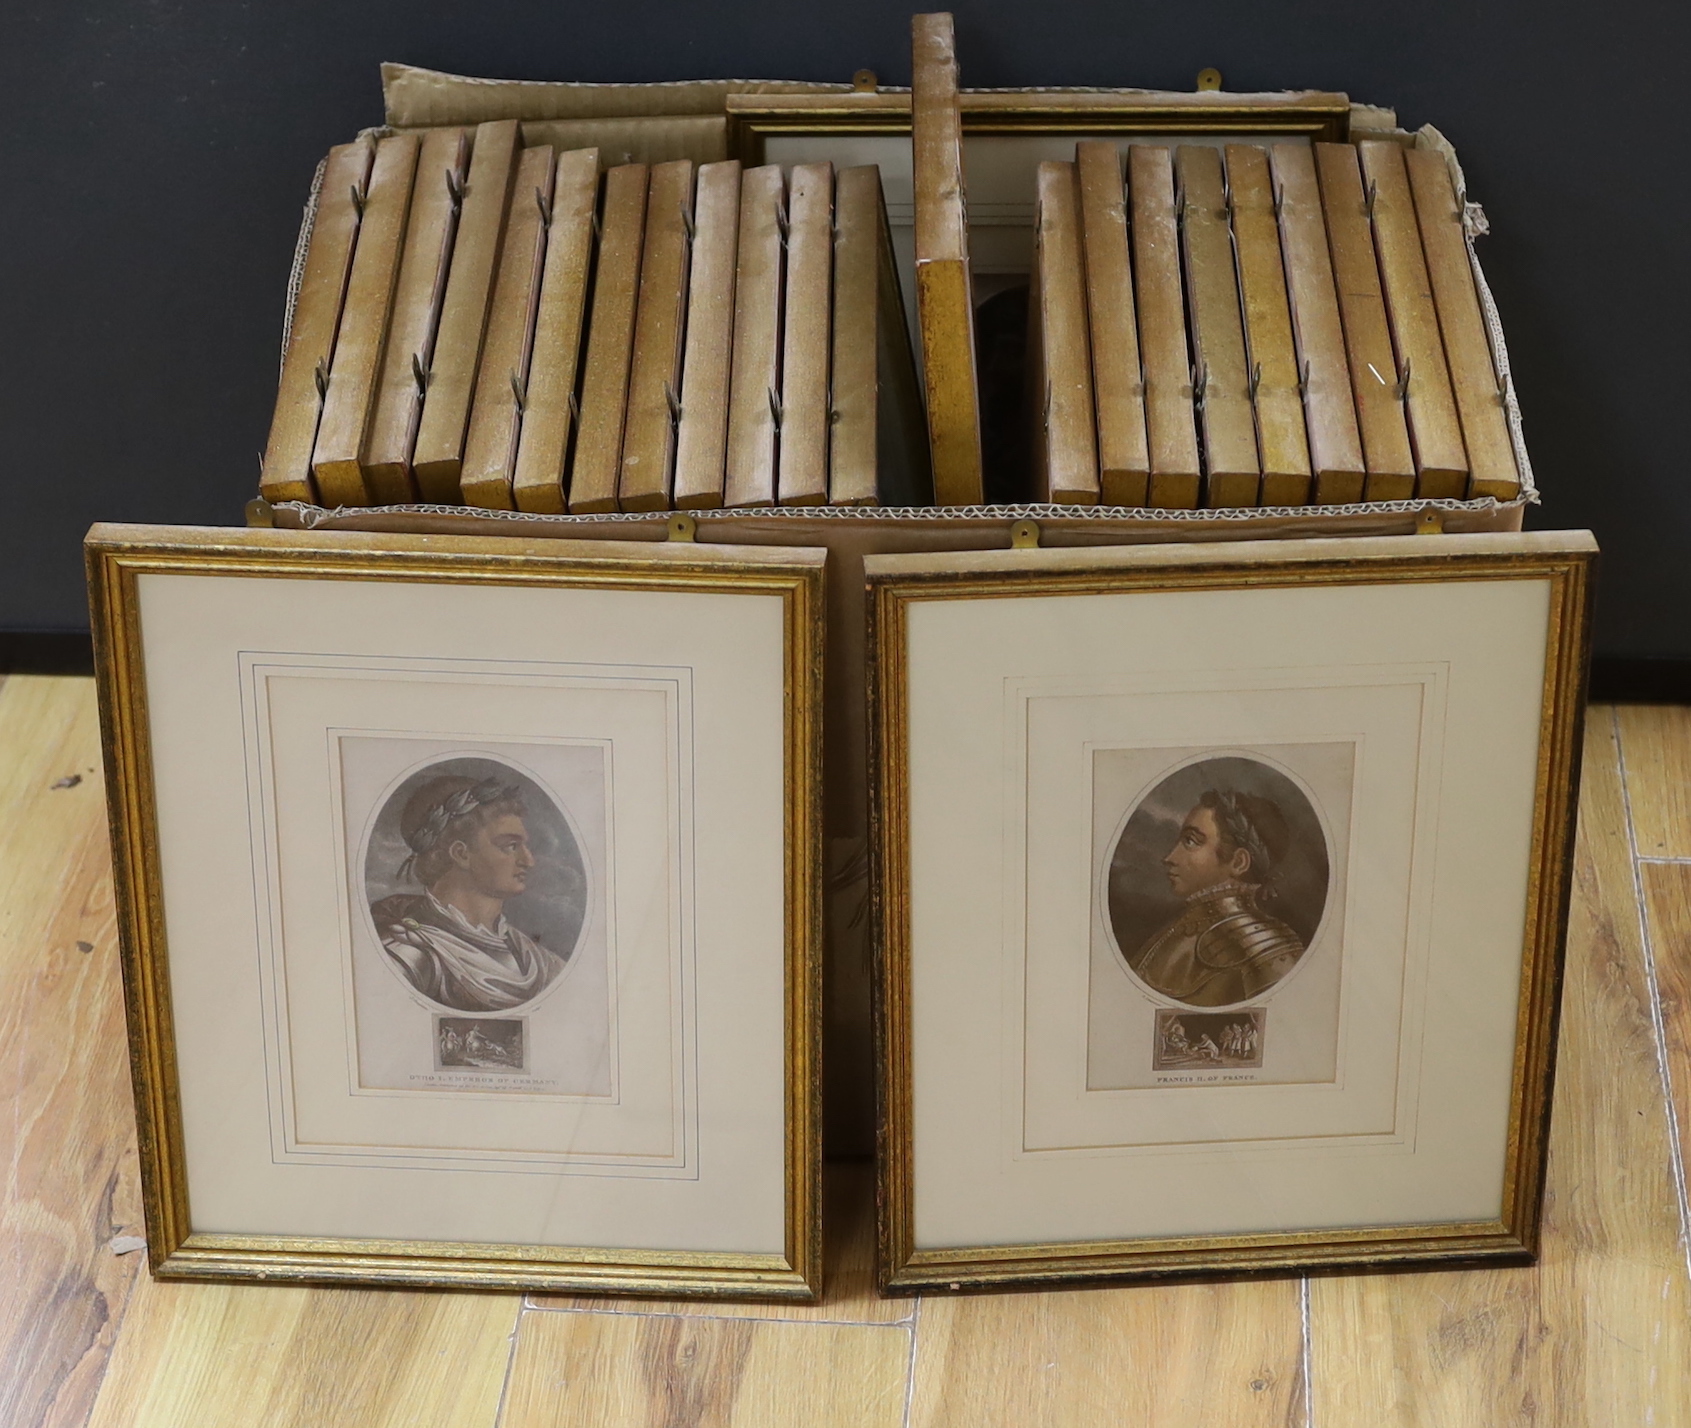 After John Chapman (act. 1792-1823), set of 25 18th/19th century coloured engravings, publ. by J Wilkes, including Edward VI, Francis II of France and Otho I Emperor of Germany, each 15 x 9cm